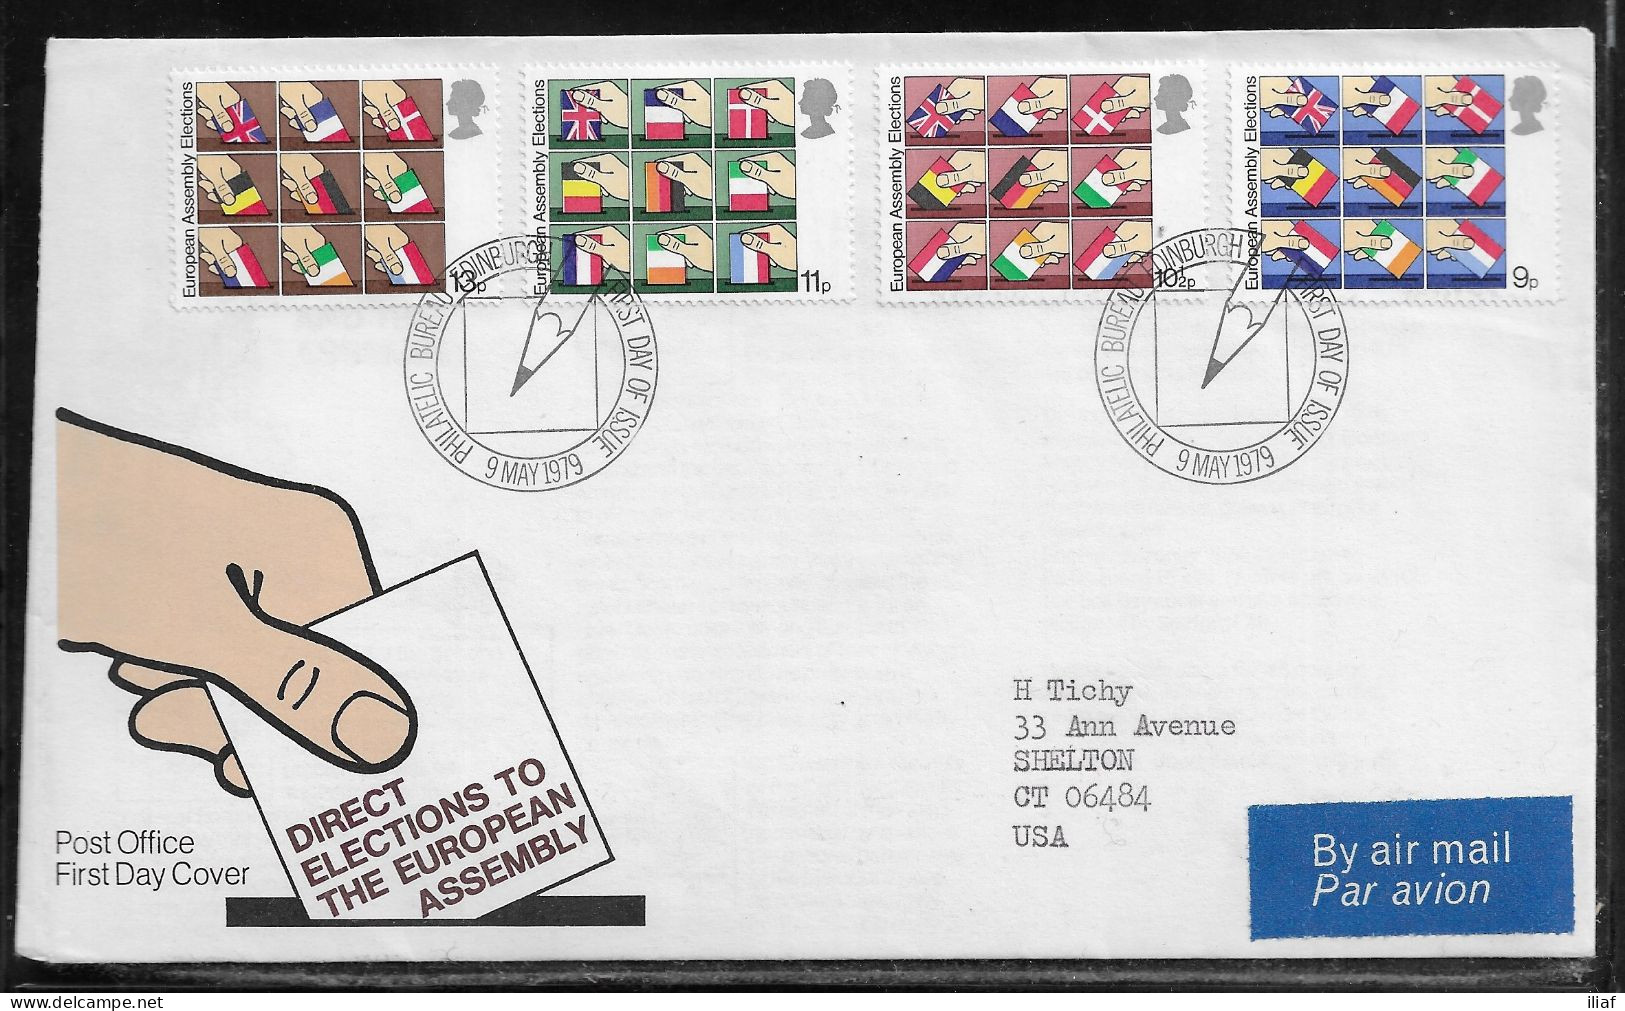 United Kingdom Of Great Britain.  FDC Sc. 859-862.  Hands Placing National Flags In Ballot Boxes  FDC Cancellation - 1971-80 Ediciones Decimal